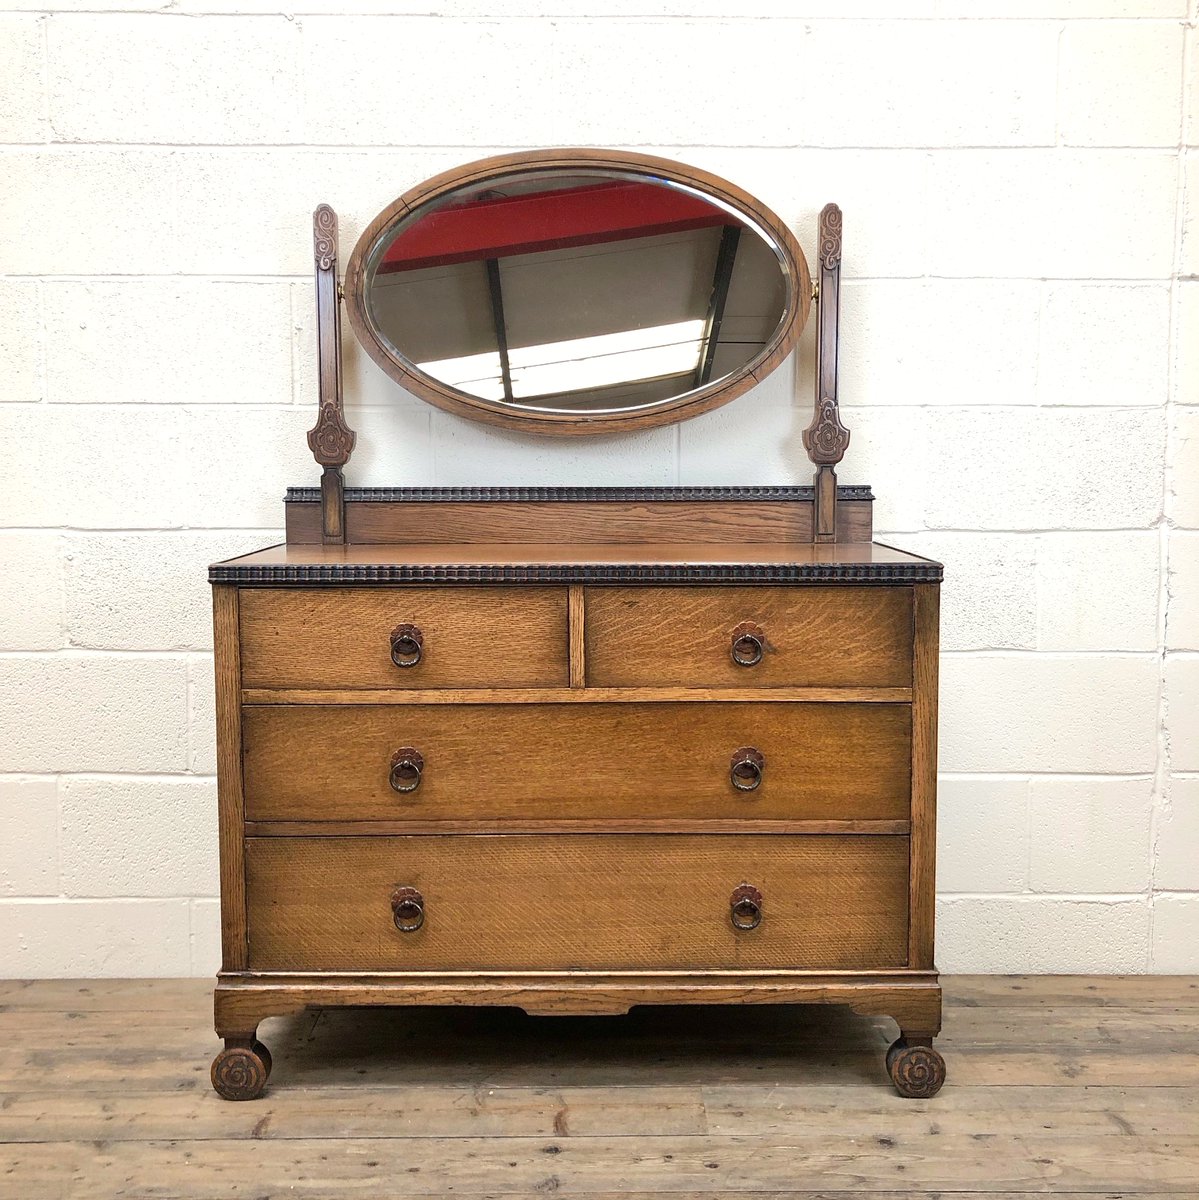 IT'S ALL IN THE DETAIL ...  This Arts and Crafts dressing table chest with oval swing mirror is a true elegant piece with flower carving detail to the feet and mirror supports. 
Now available online at soo.nr/Ny9P #antiques #dressingroomideas #dressingroominspo #style